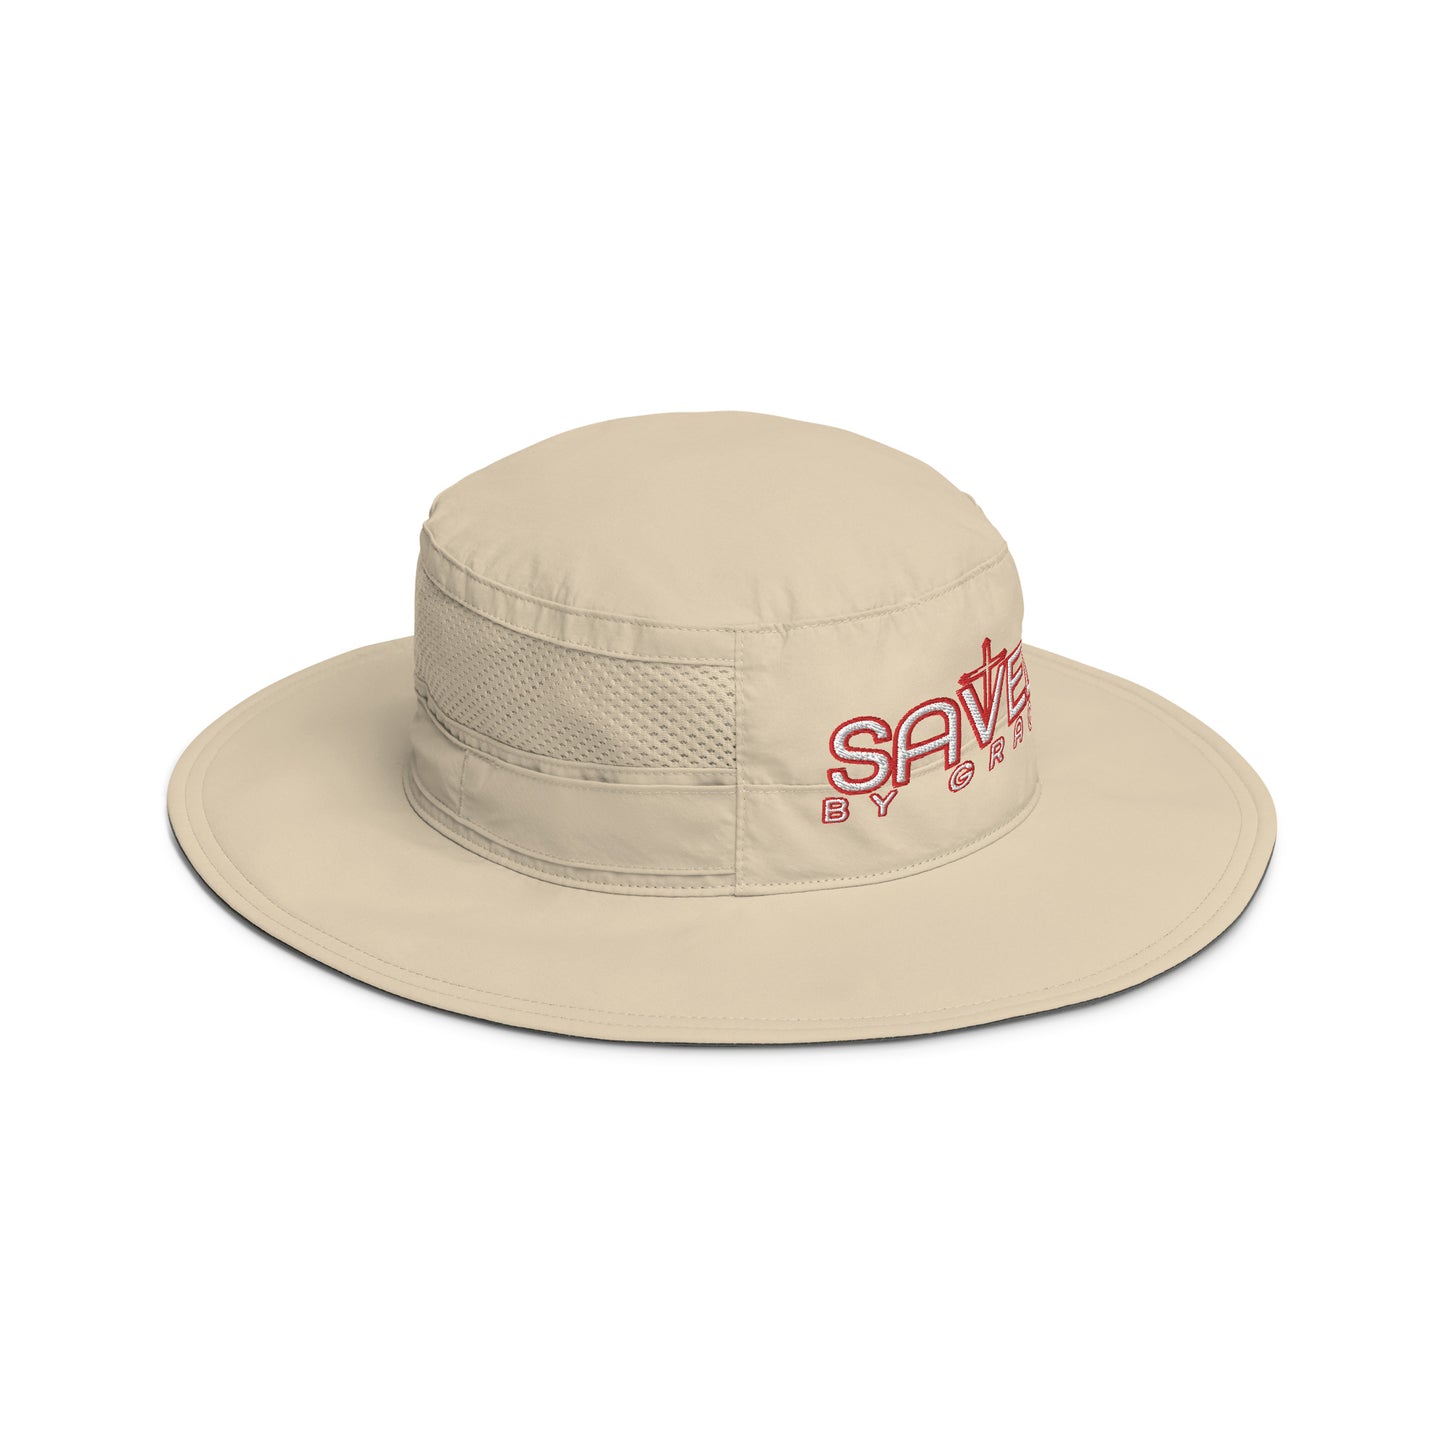 SAVED BY GRACE- Columbia booney hat